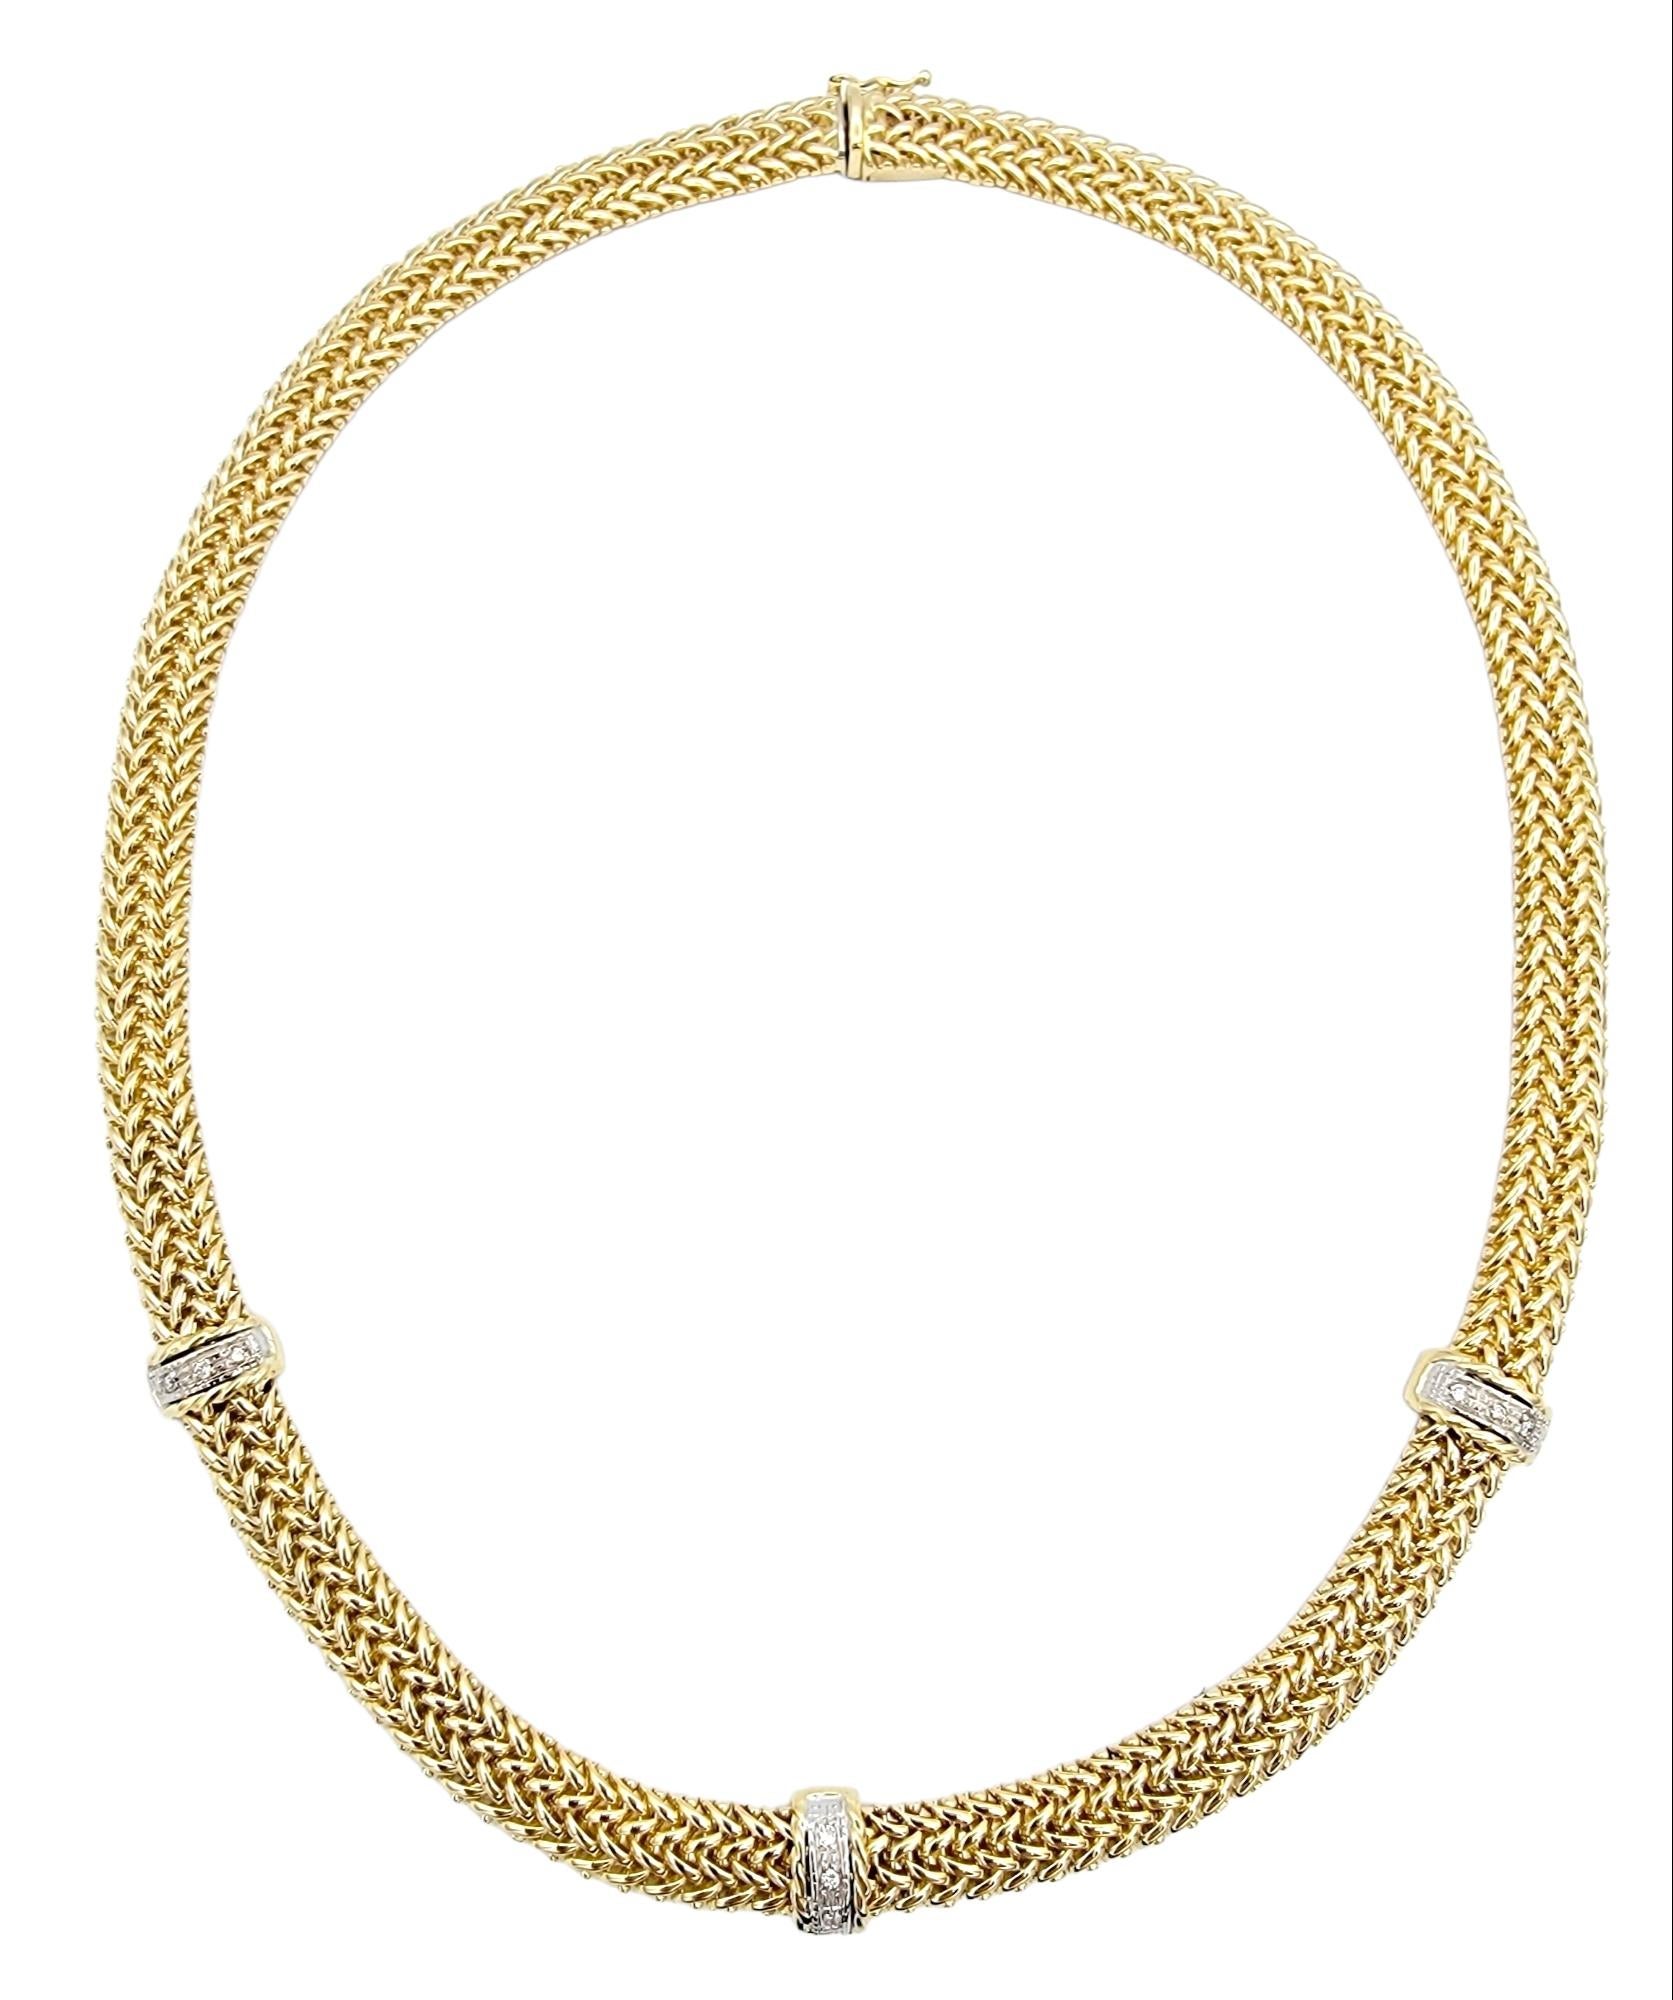 We absolutely love the versatility of this chic and modern diamond station necklace. Designed to elevate any ensemble that it's paired with, this stunning piece showcases impeccable craftsmanship and timeless elegance.

The gorgeous collar necklace